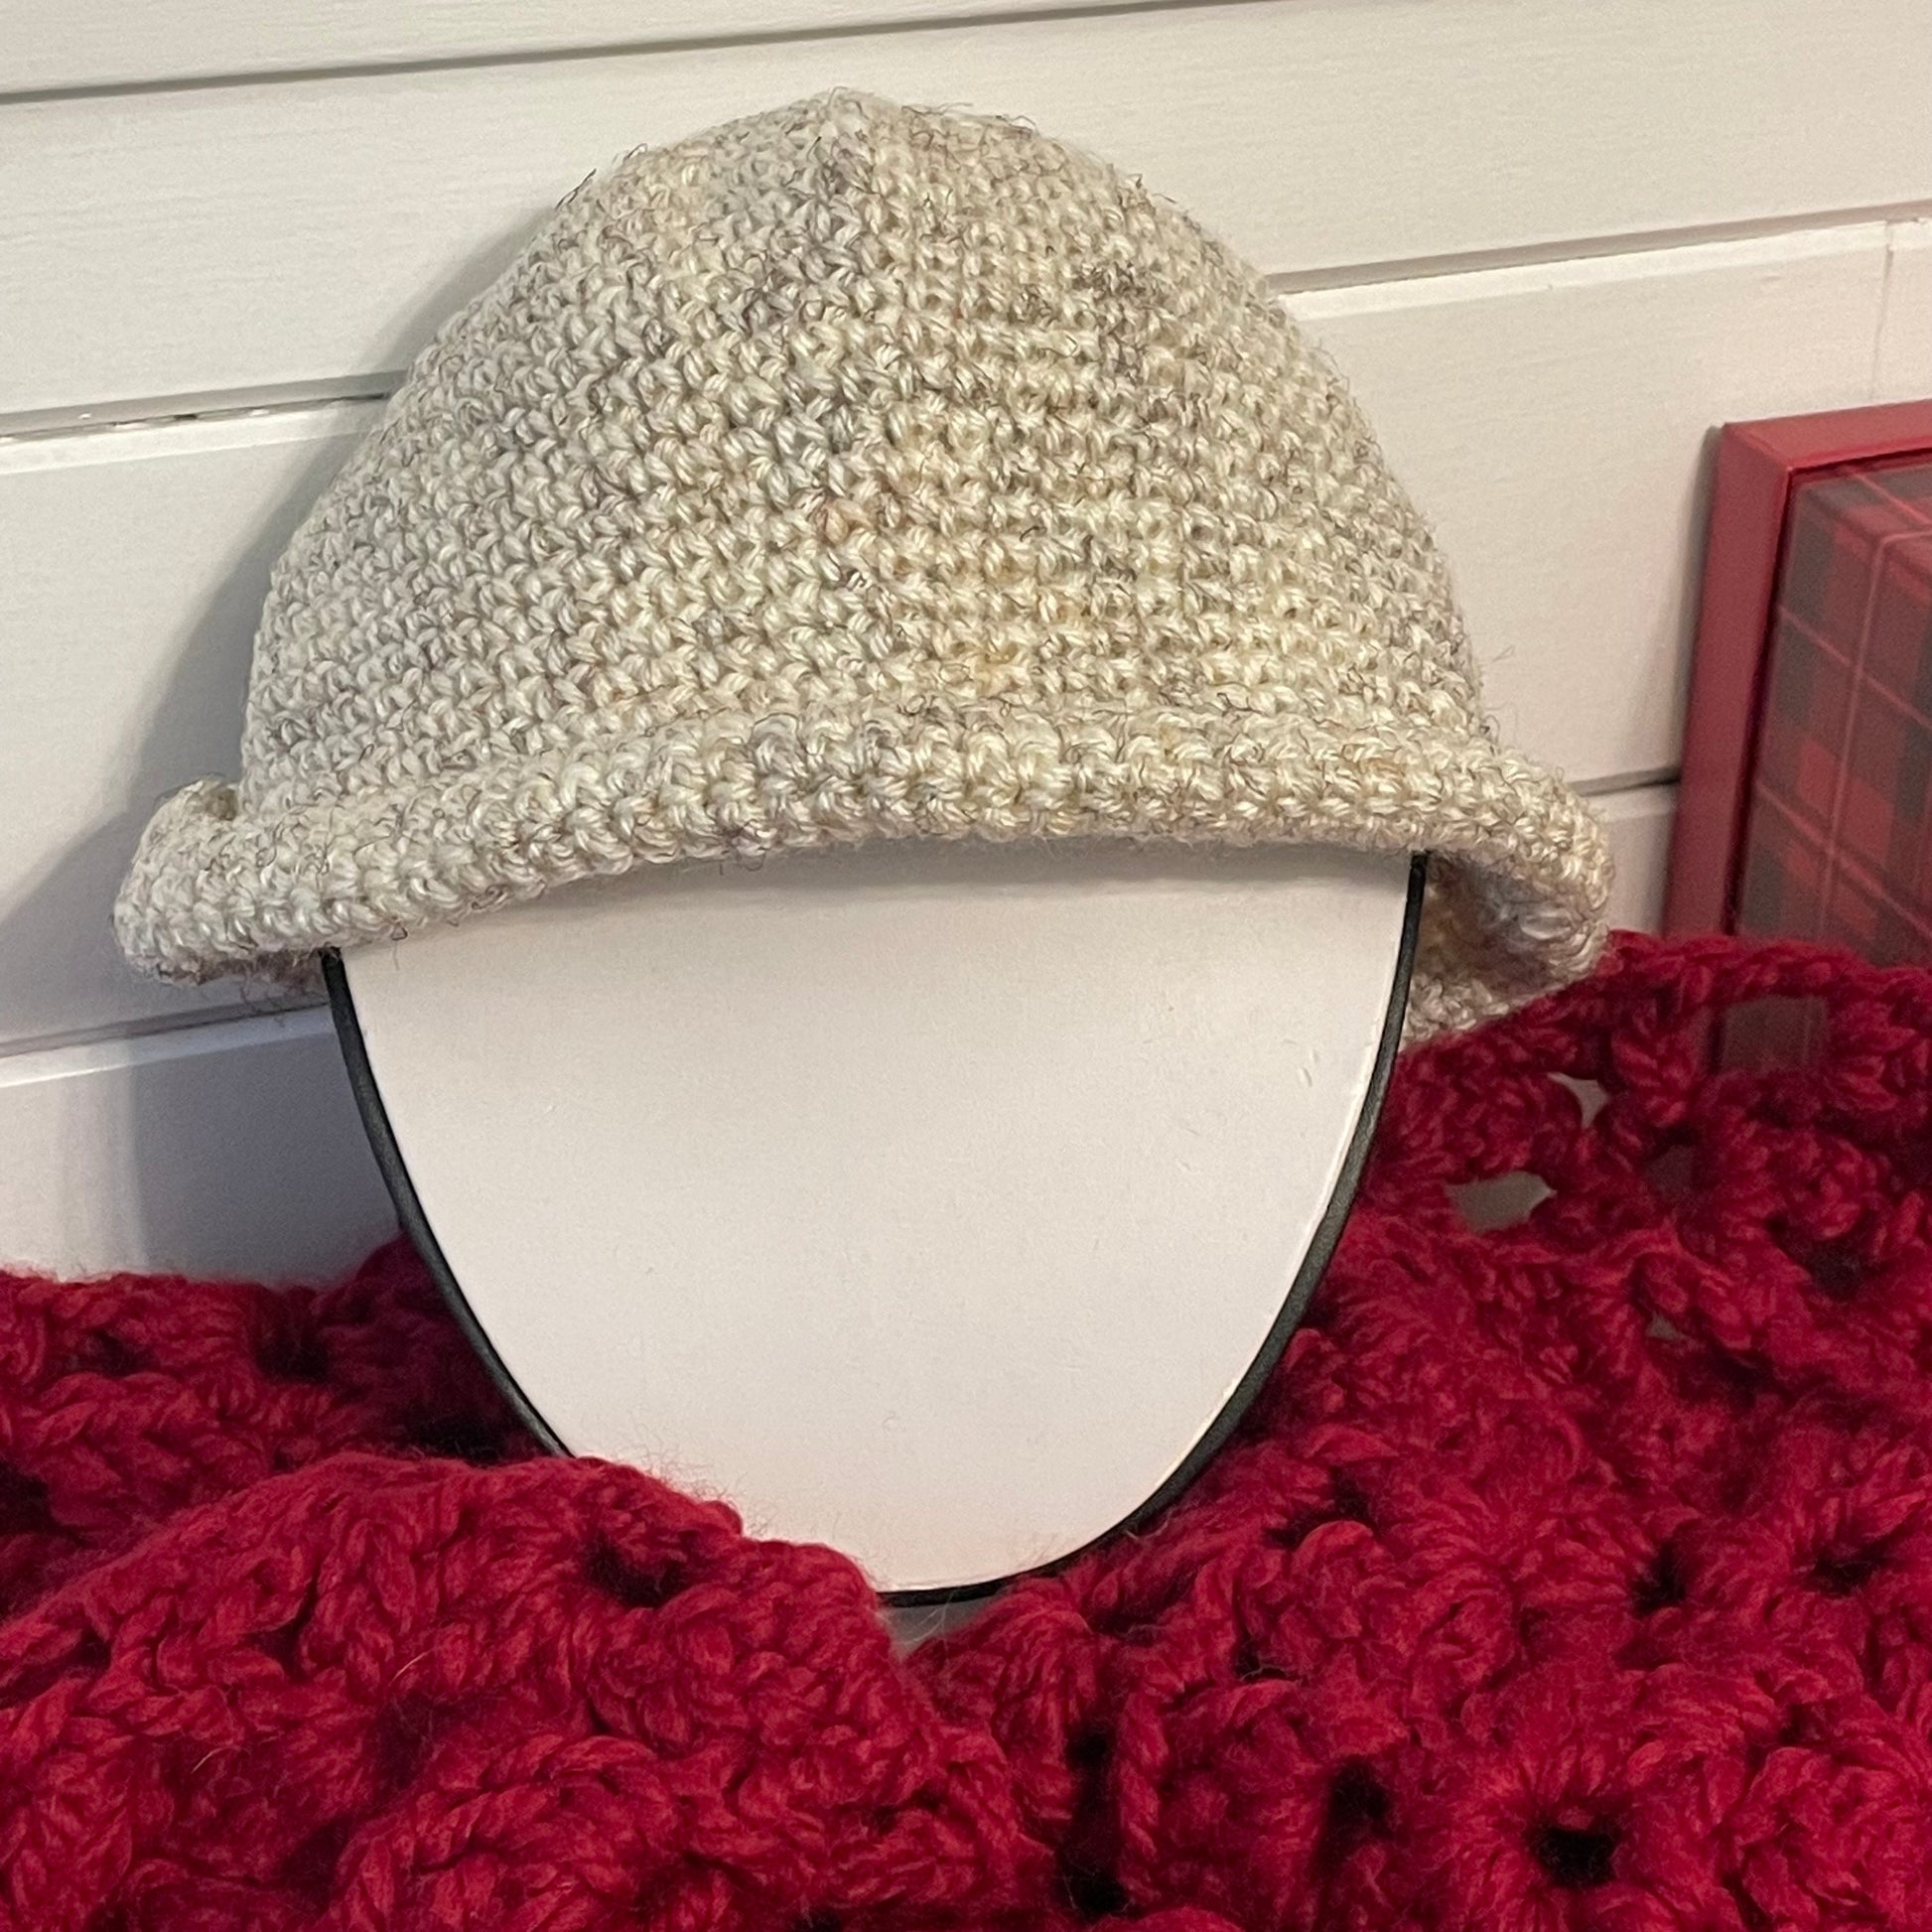 Crochet Rolled Brim Hat in Light Marbled Wheat Hand Crafted Knit Unisex Vintage Retro Style Outdoor front view on red and white background